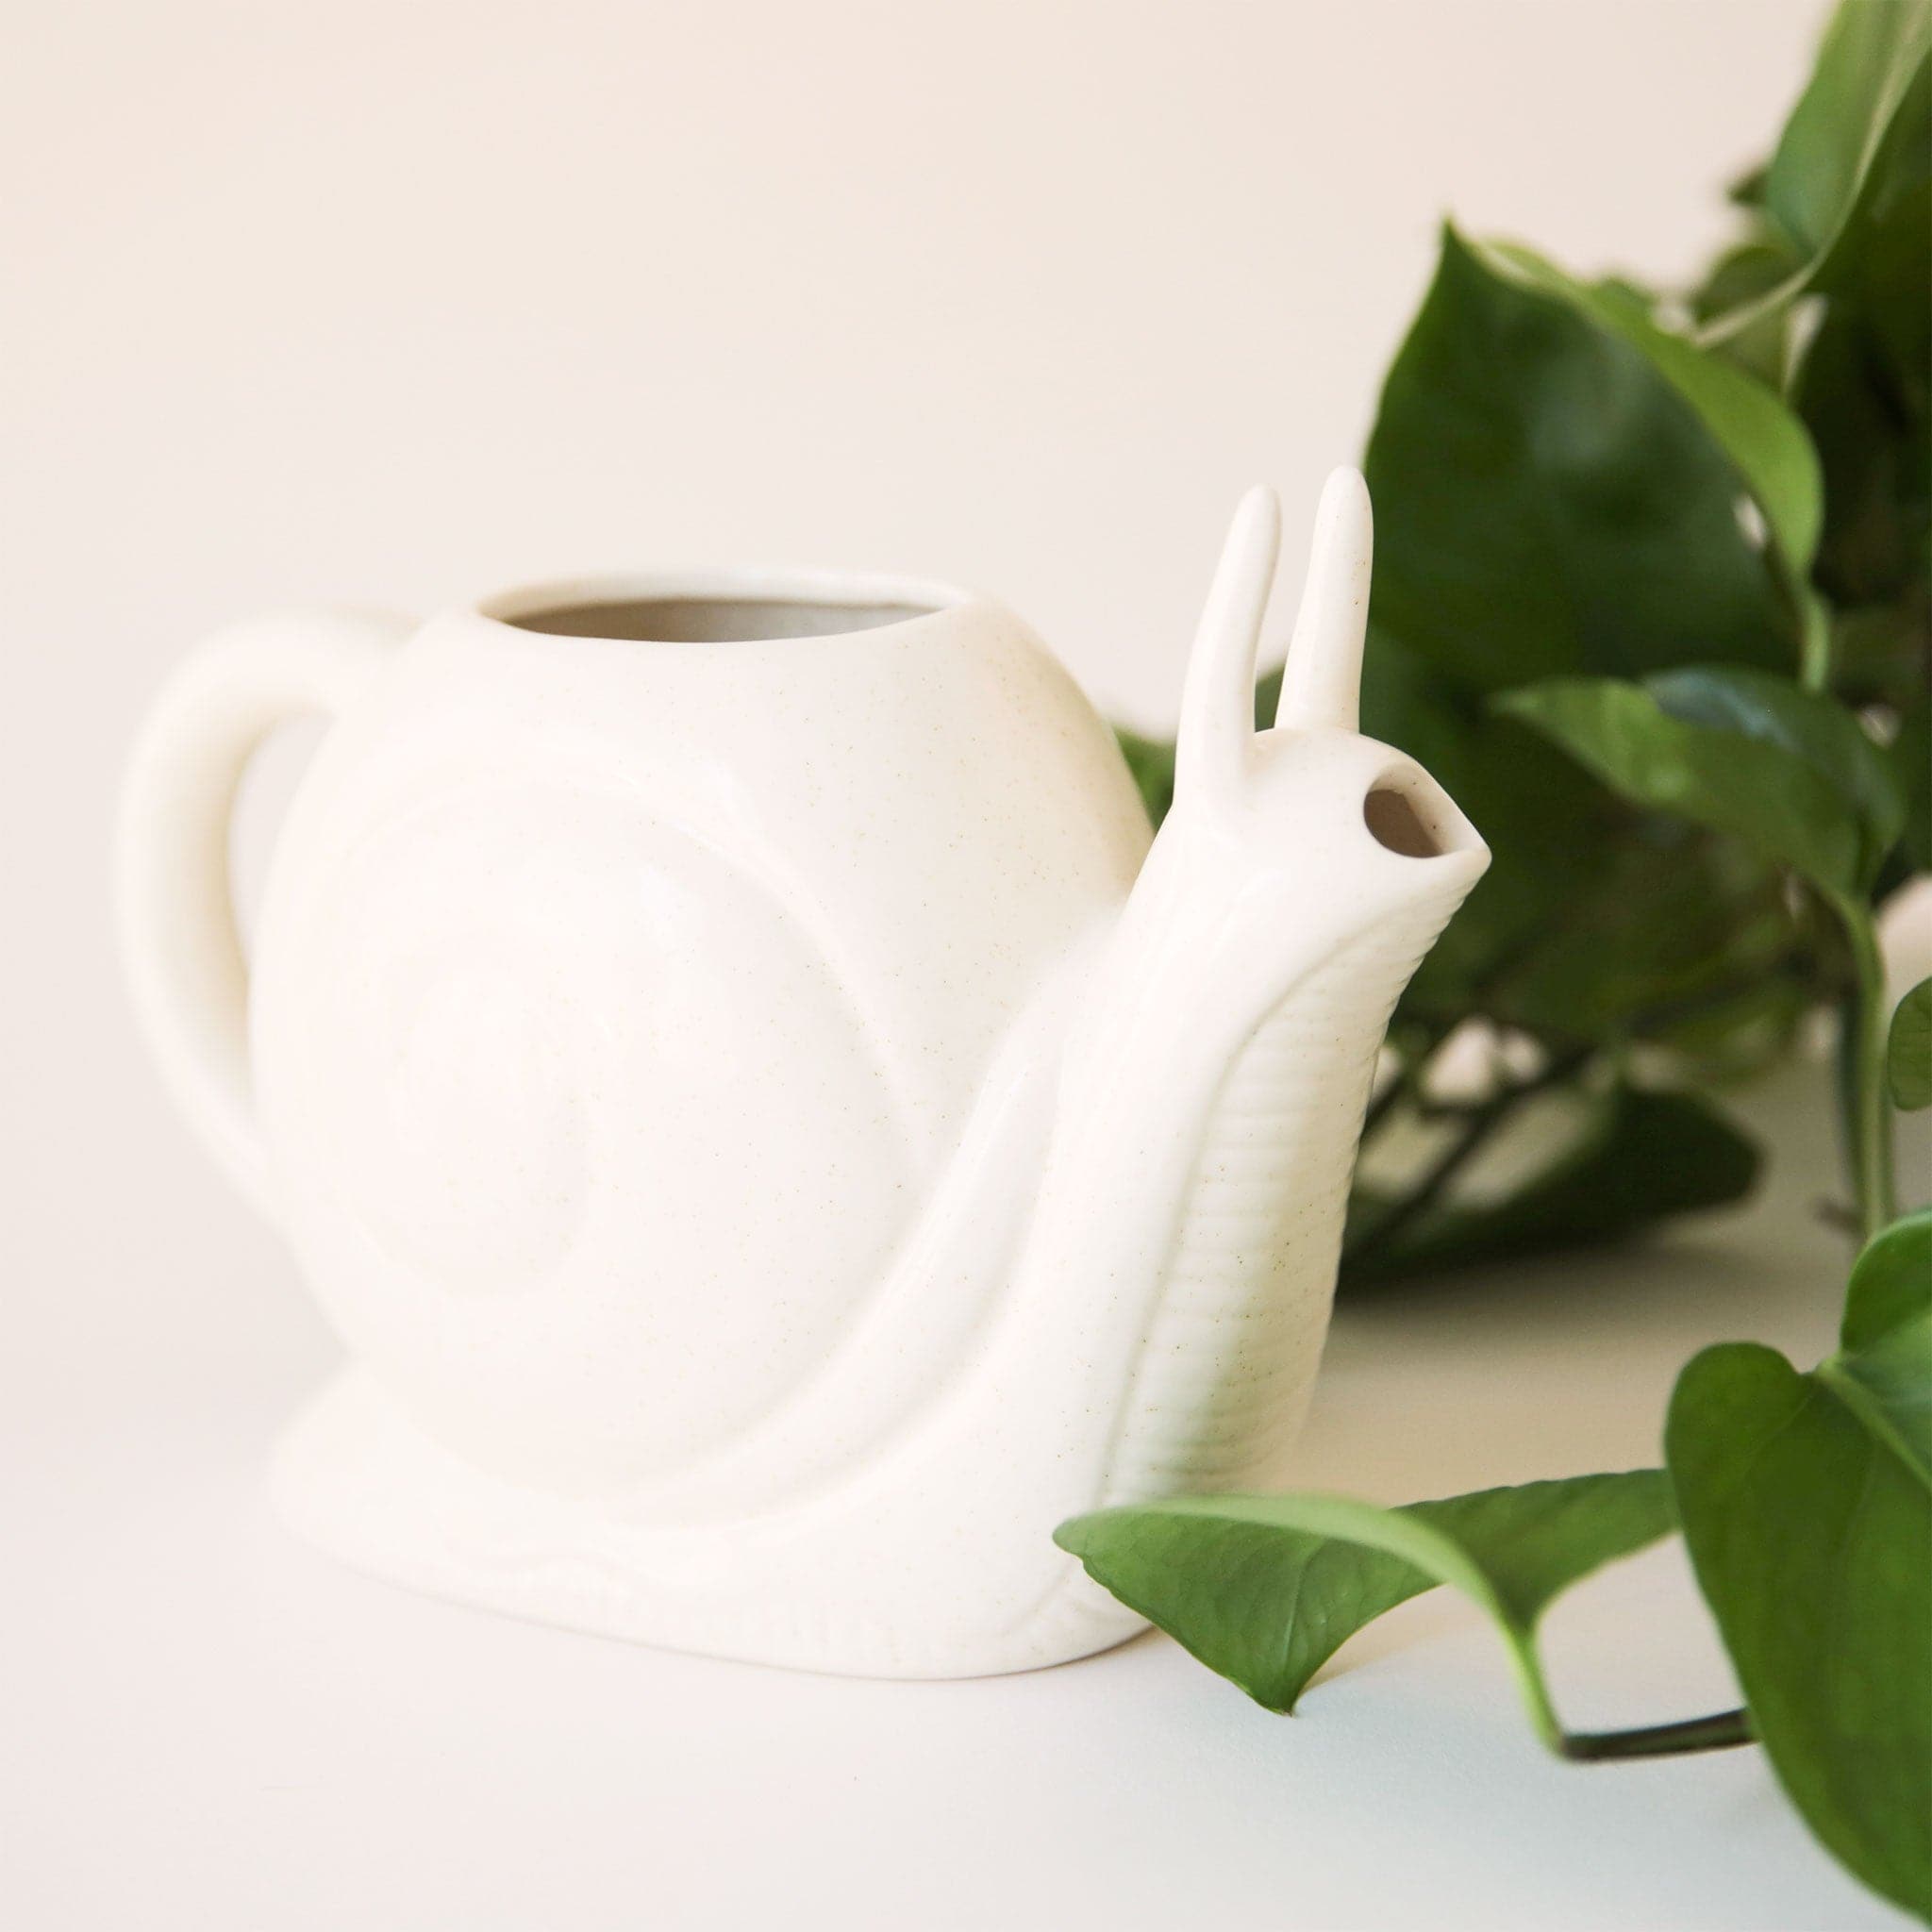 A white, ceramic watering can in the shape of a friendly snail. The opening for refilling with water is on the top of its swirly shell and the water spout comes out of the mouth area. This playful garden tool also features a comfortable handle for easy watering.